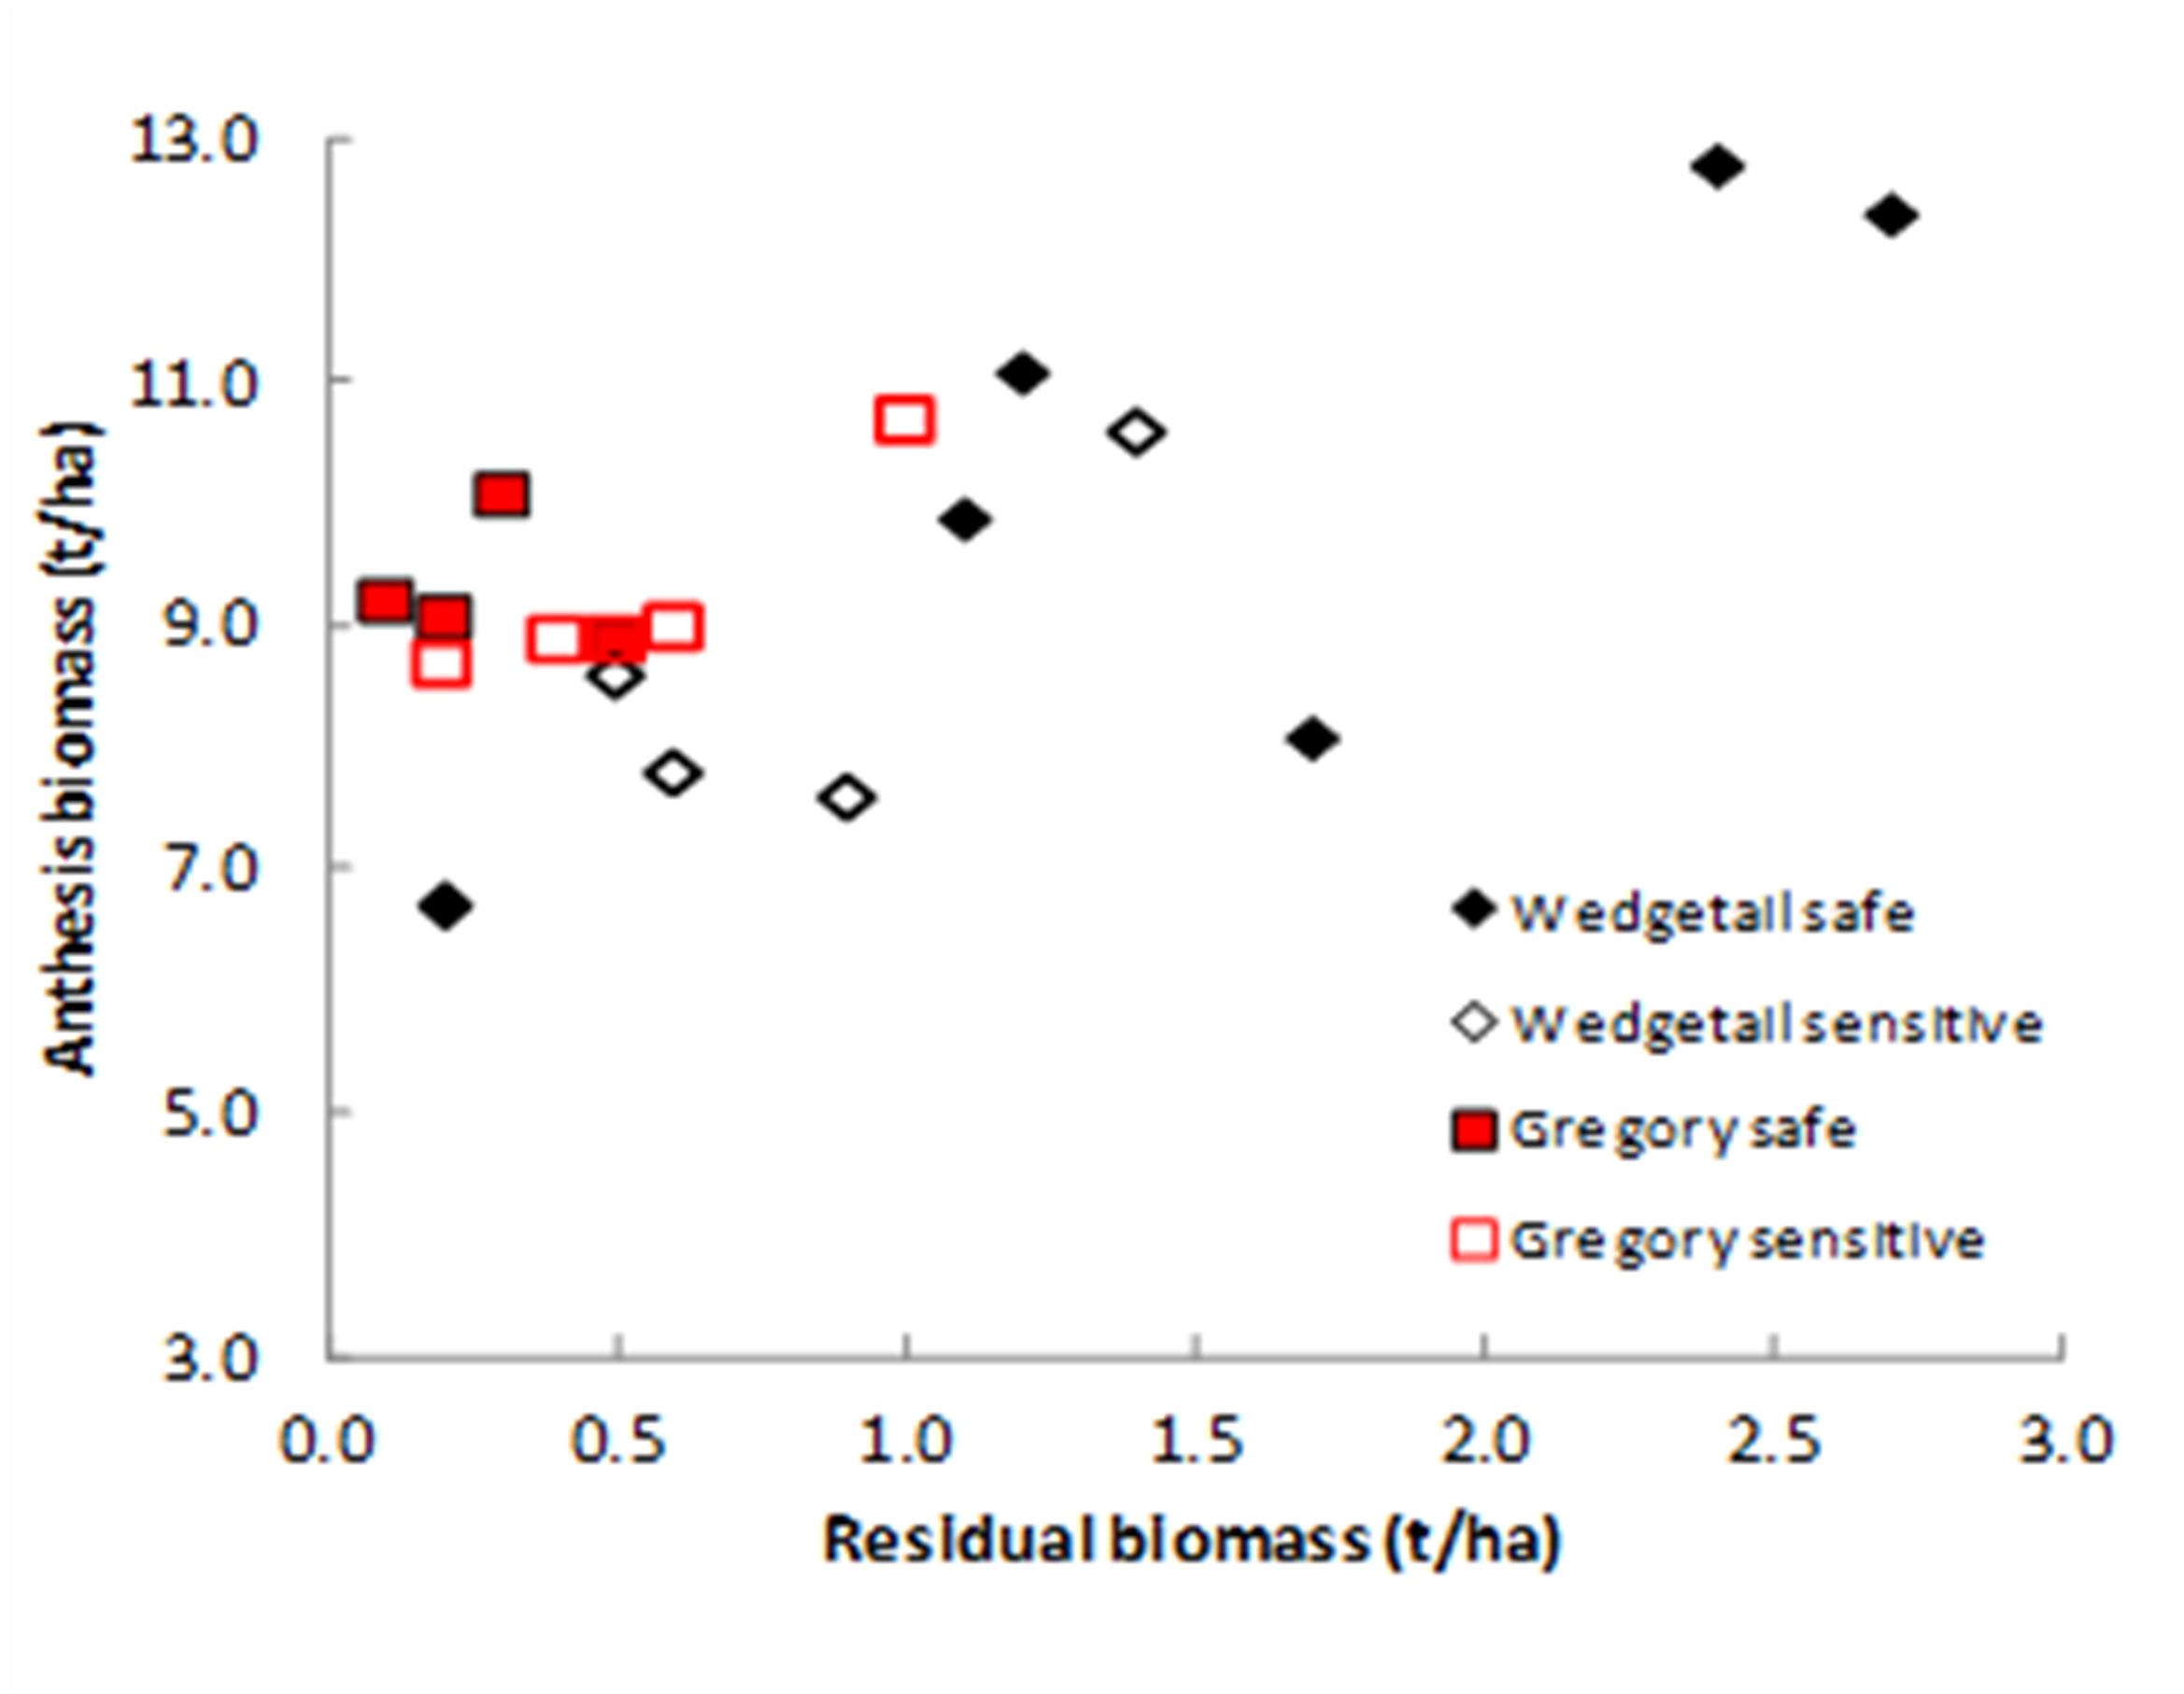 Figure 3. (a) shows that for a 4.4 t/ha target yield in wheat, around 8.0 to 9.0 t/ha was required at anthesis, and treatments with less than this had reduced yield. (b) shows that residual biomass after grazing of >0.5 t/had in late July was sufficient to reach the critical anthesis biomass for 4.4 t/ha yield.